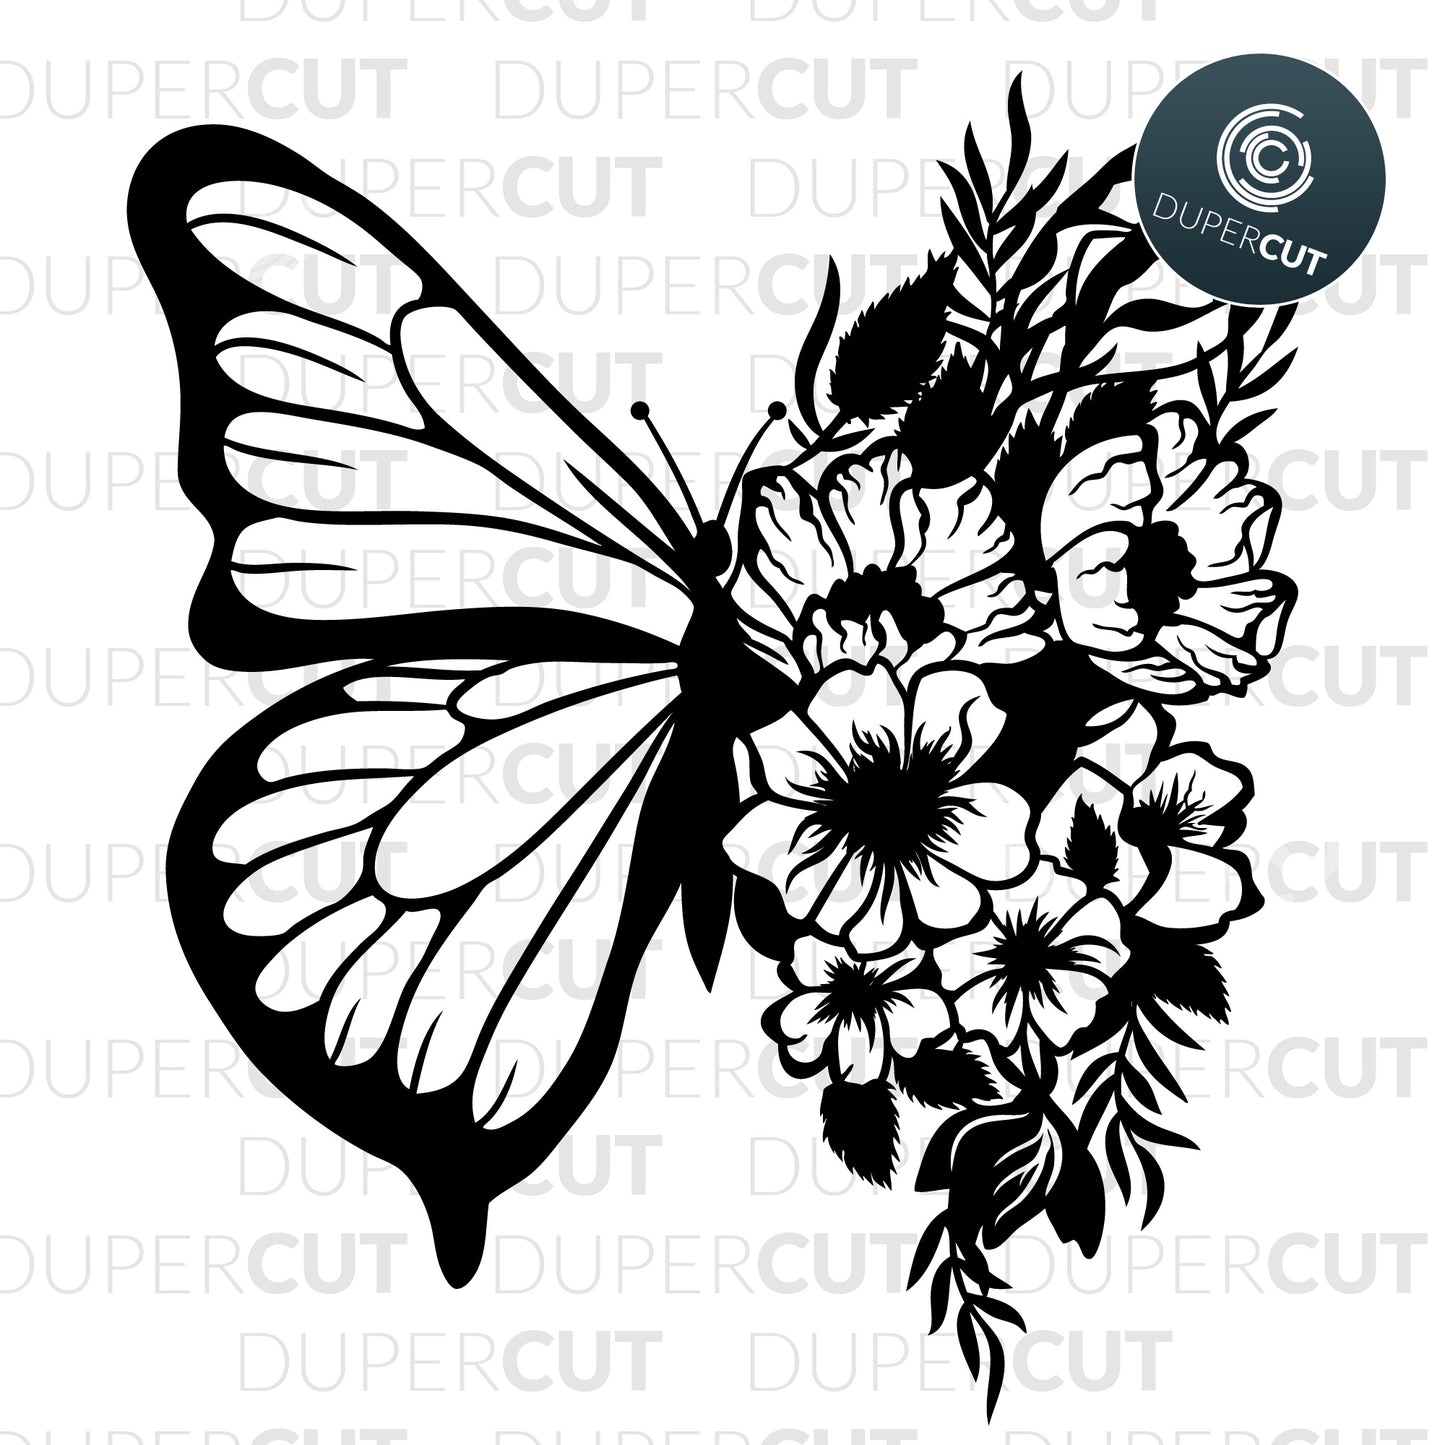 Half butterfly, half flower tattoo black illustration. SVG JPEG DXF files. Template for paper cutting, laser, print on demand. For use with Cricut, Glowforge, Silhouette Cameo, CNC machines. Personal or commercial license.